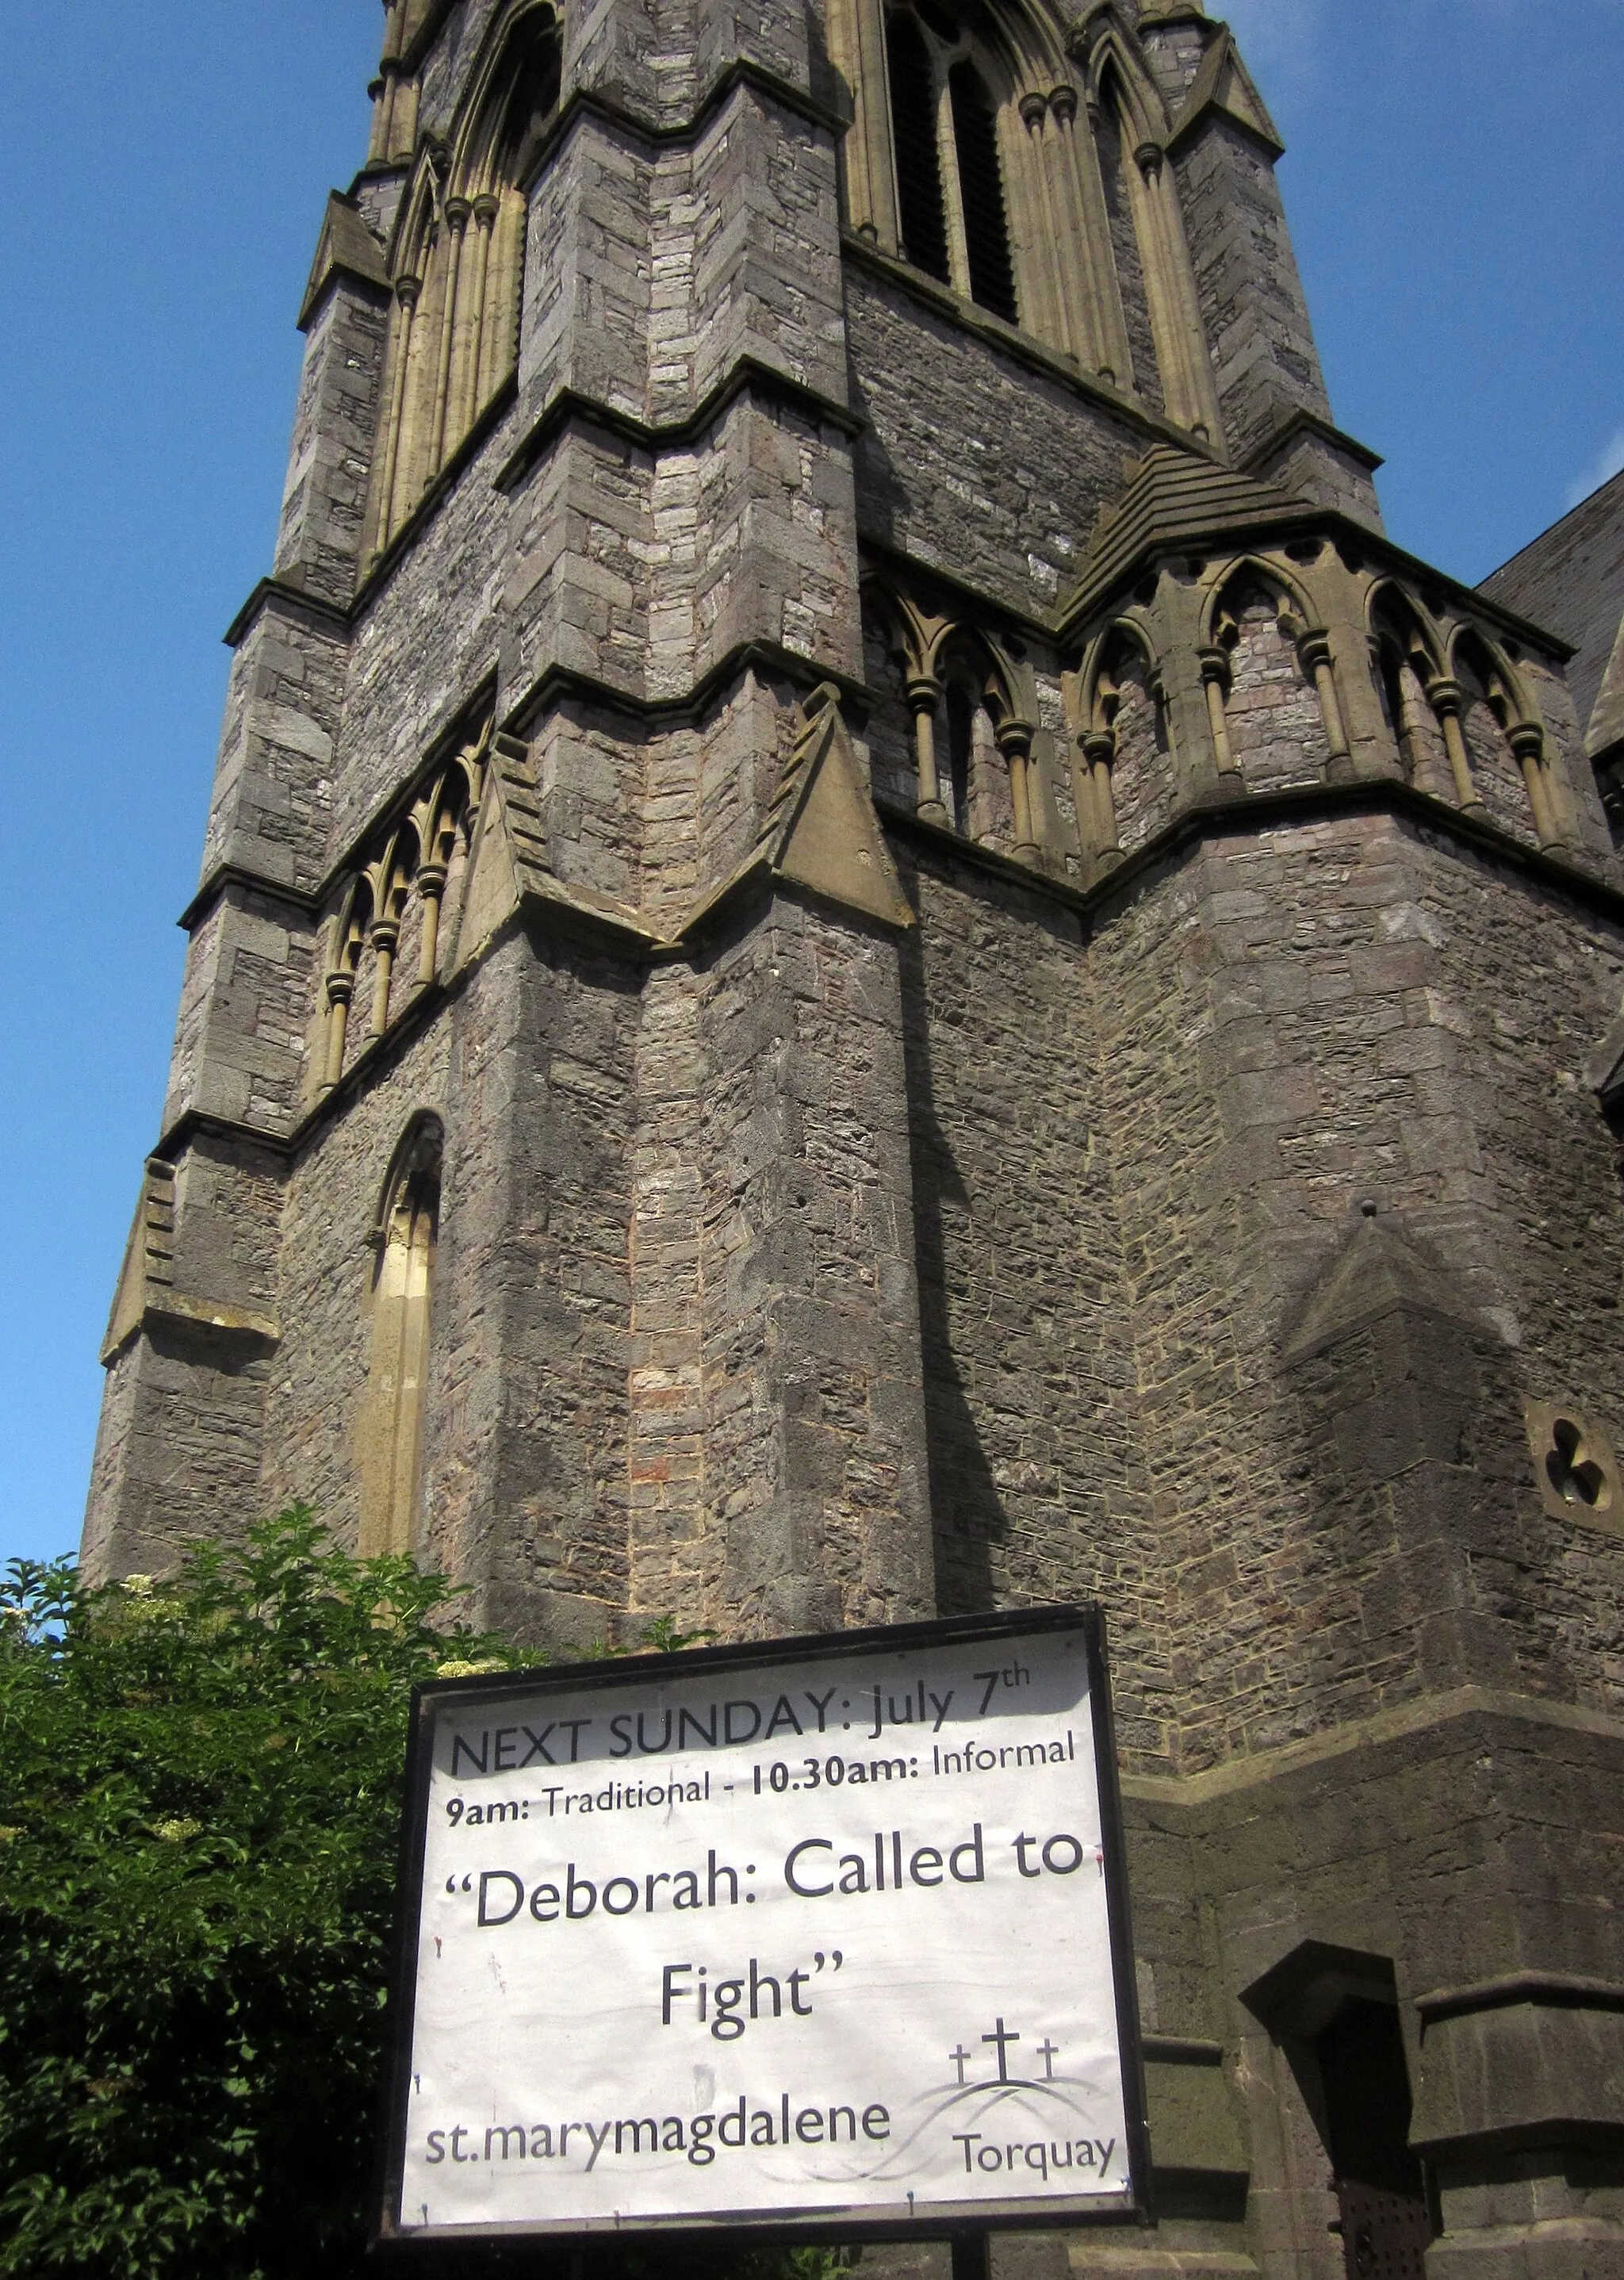 Photo showing: "Deborah: called to fight"